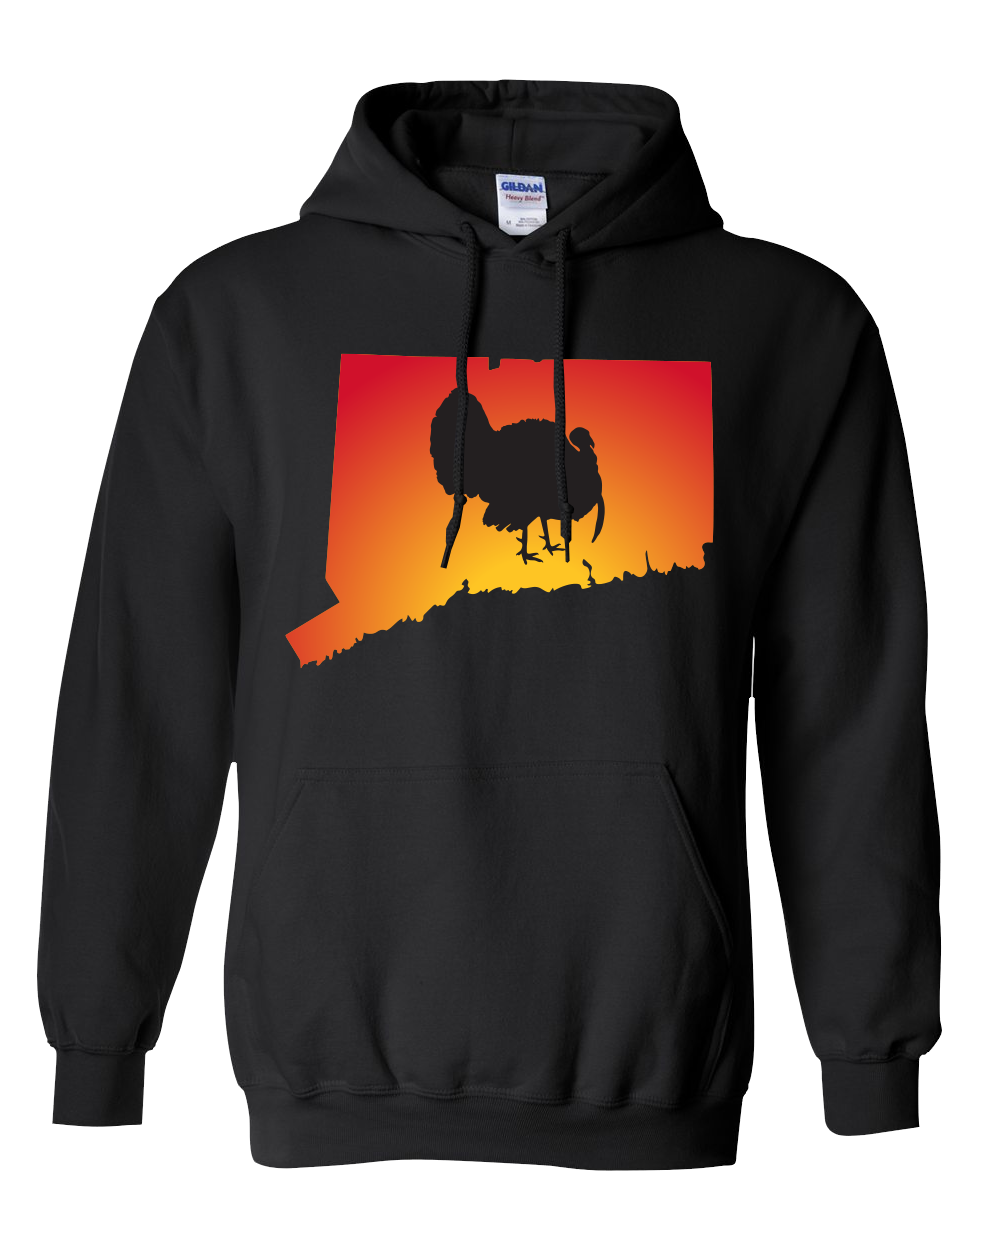 Pullover Hooded Sweatshirt Connecticut Black Turkey Vibrant Design High Quality Tight Knit Ring Spun Low Maintenance Cotton Printed With The Newest Available Color Transfer Technology